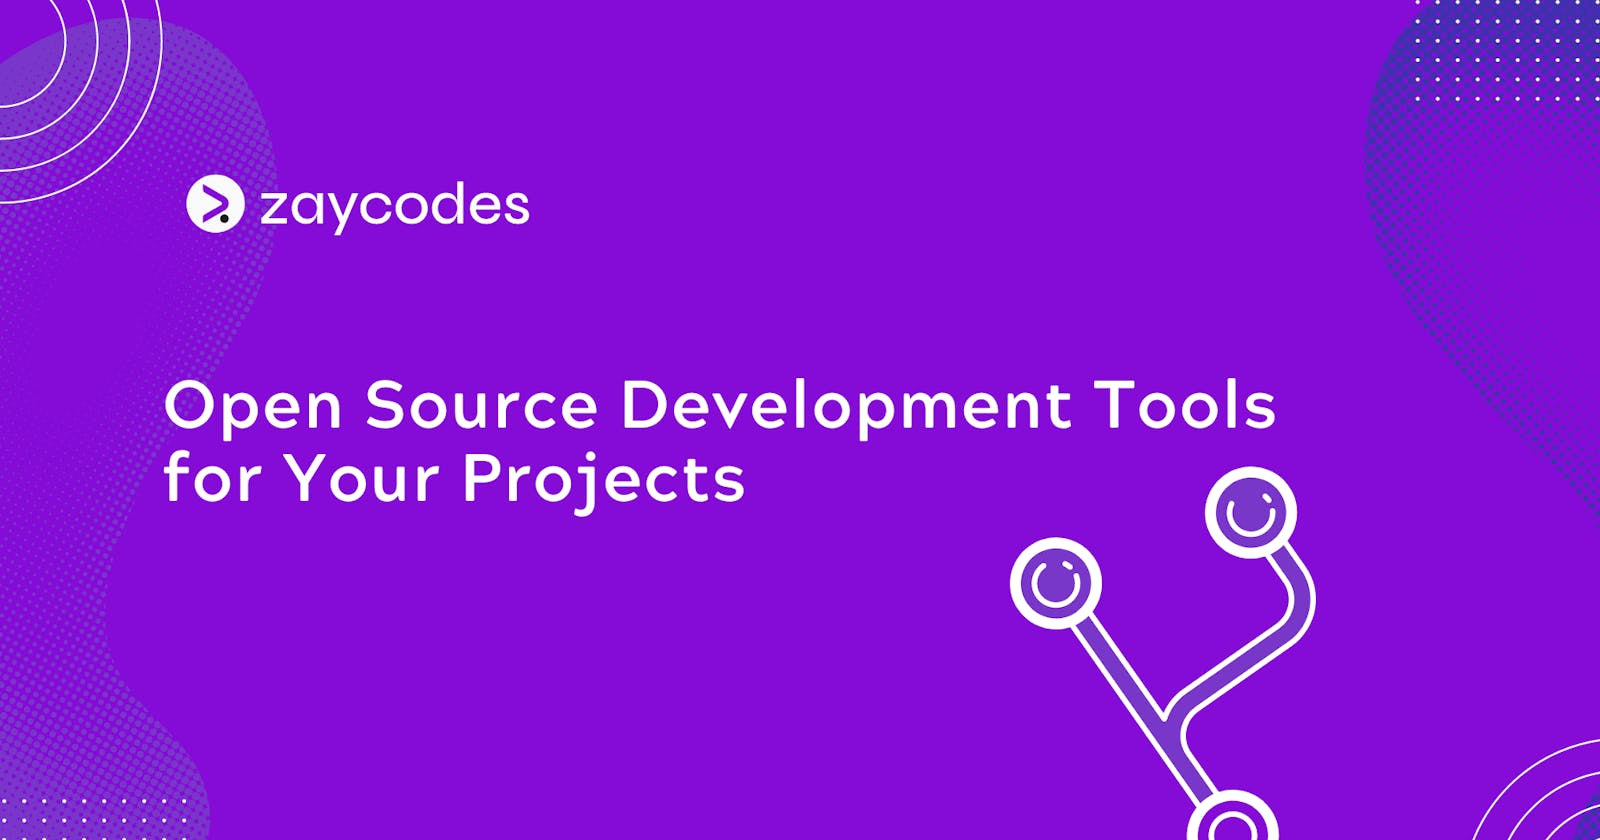 Open-Source Development Tools for Your Projects